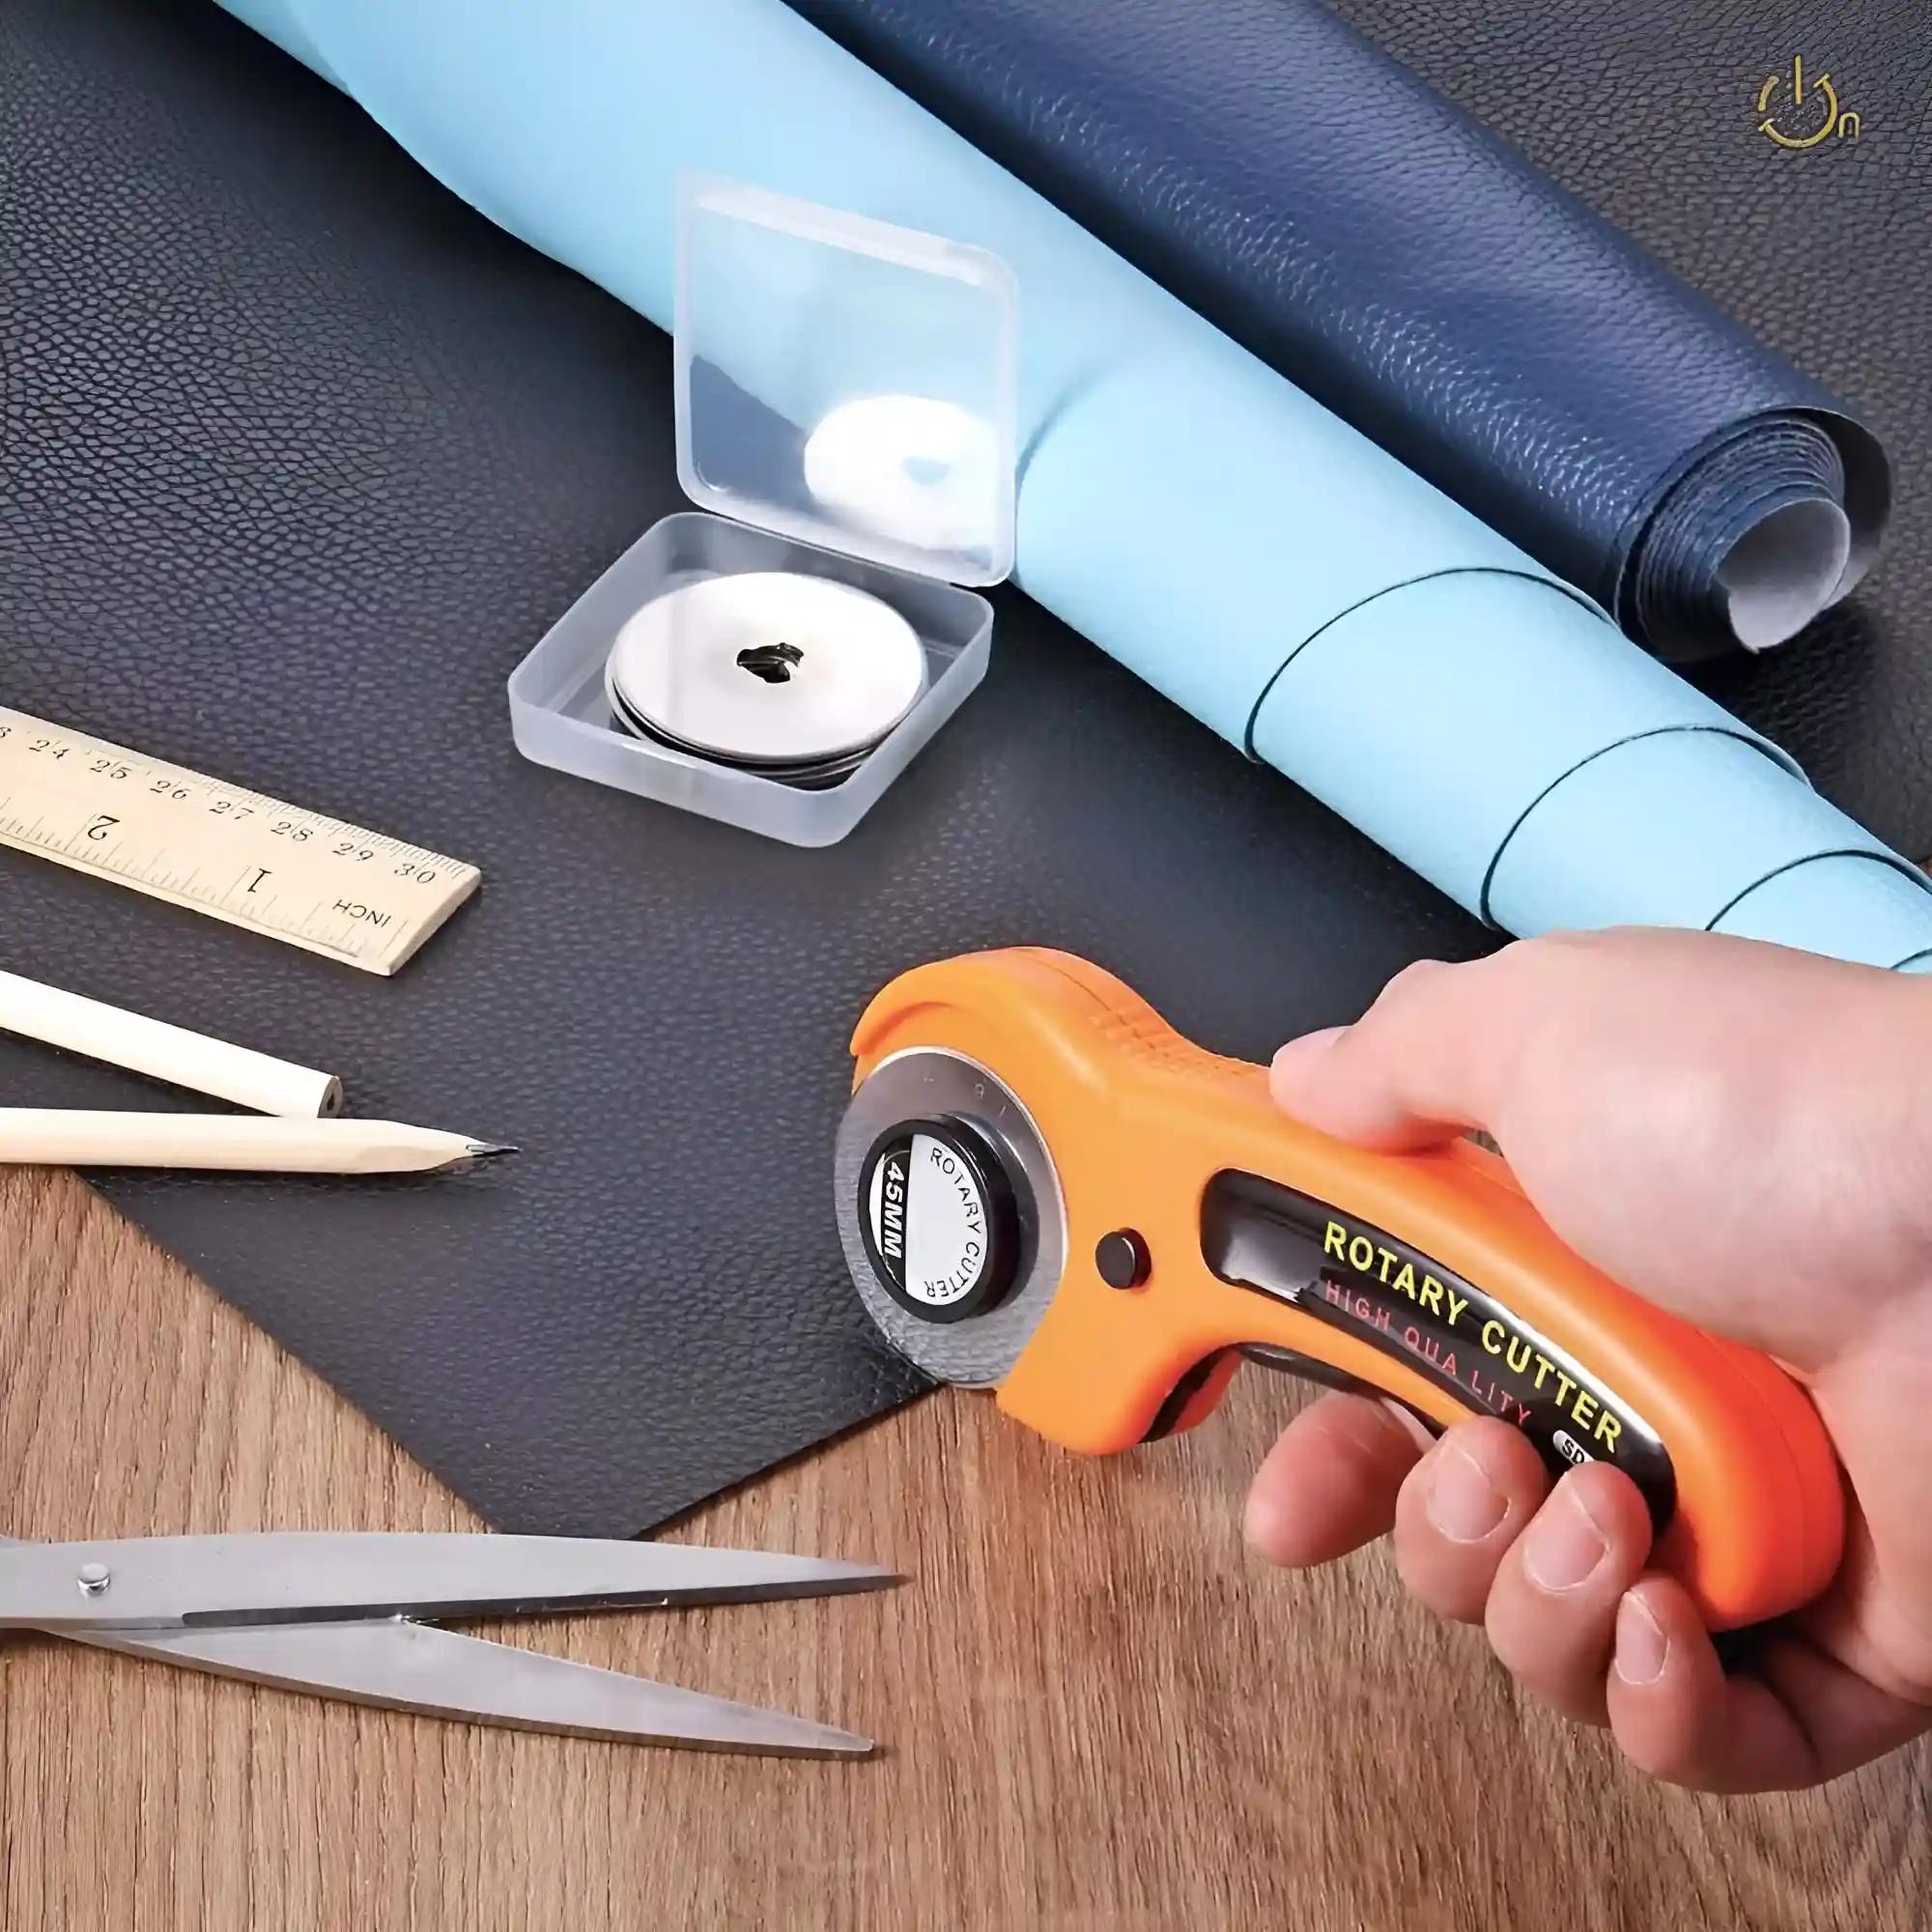 45Mm Blade Rotary Cutter With Safety Lock Cloth Cutting Tool Fabric Cutter Wheel Rotary Cutter Blade For Dense Fabrics Denim Corduroy And Multiple Projects (Multicolour -1Piece)